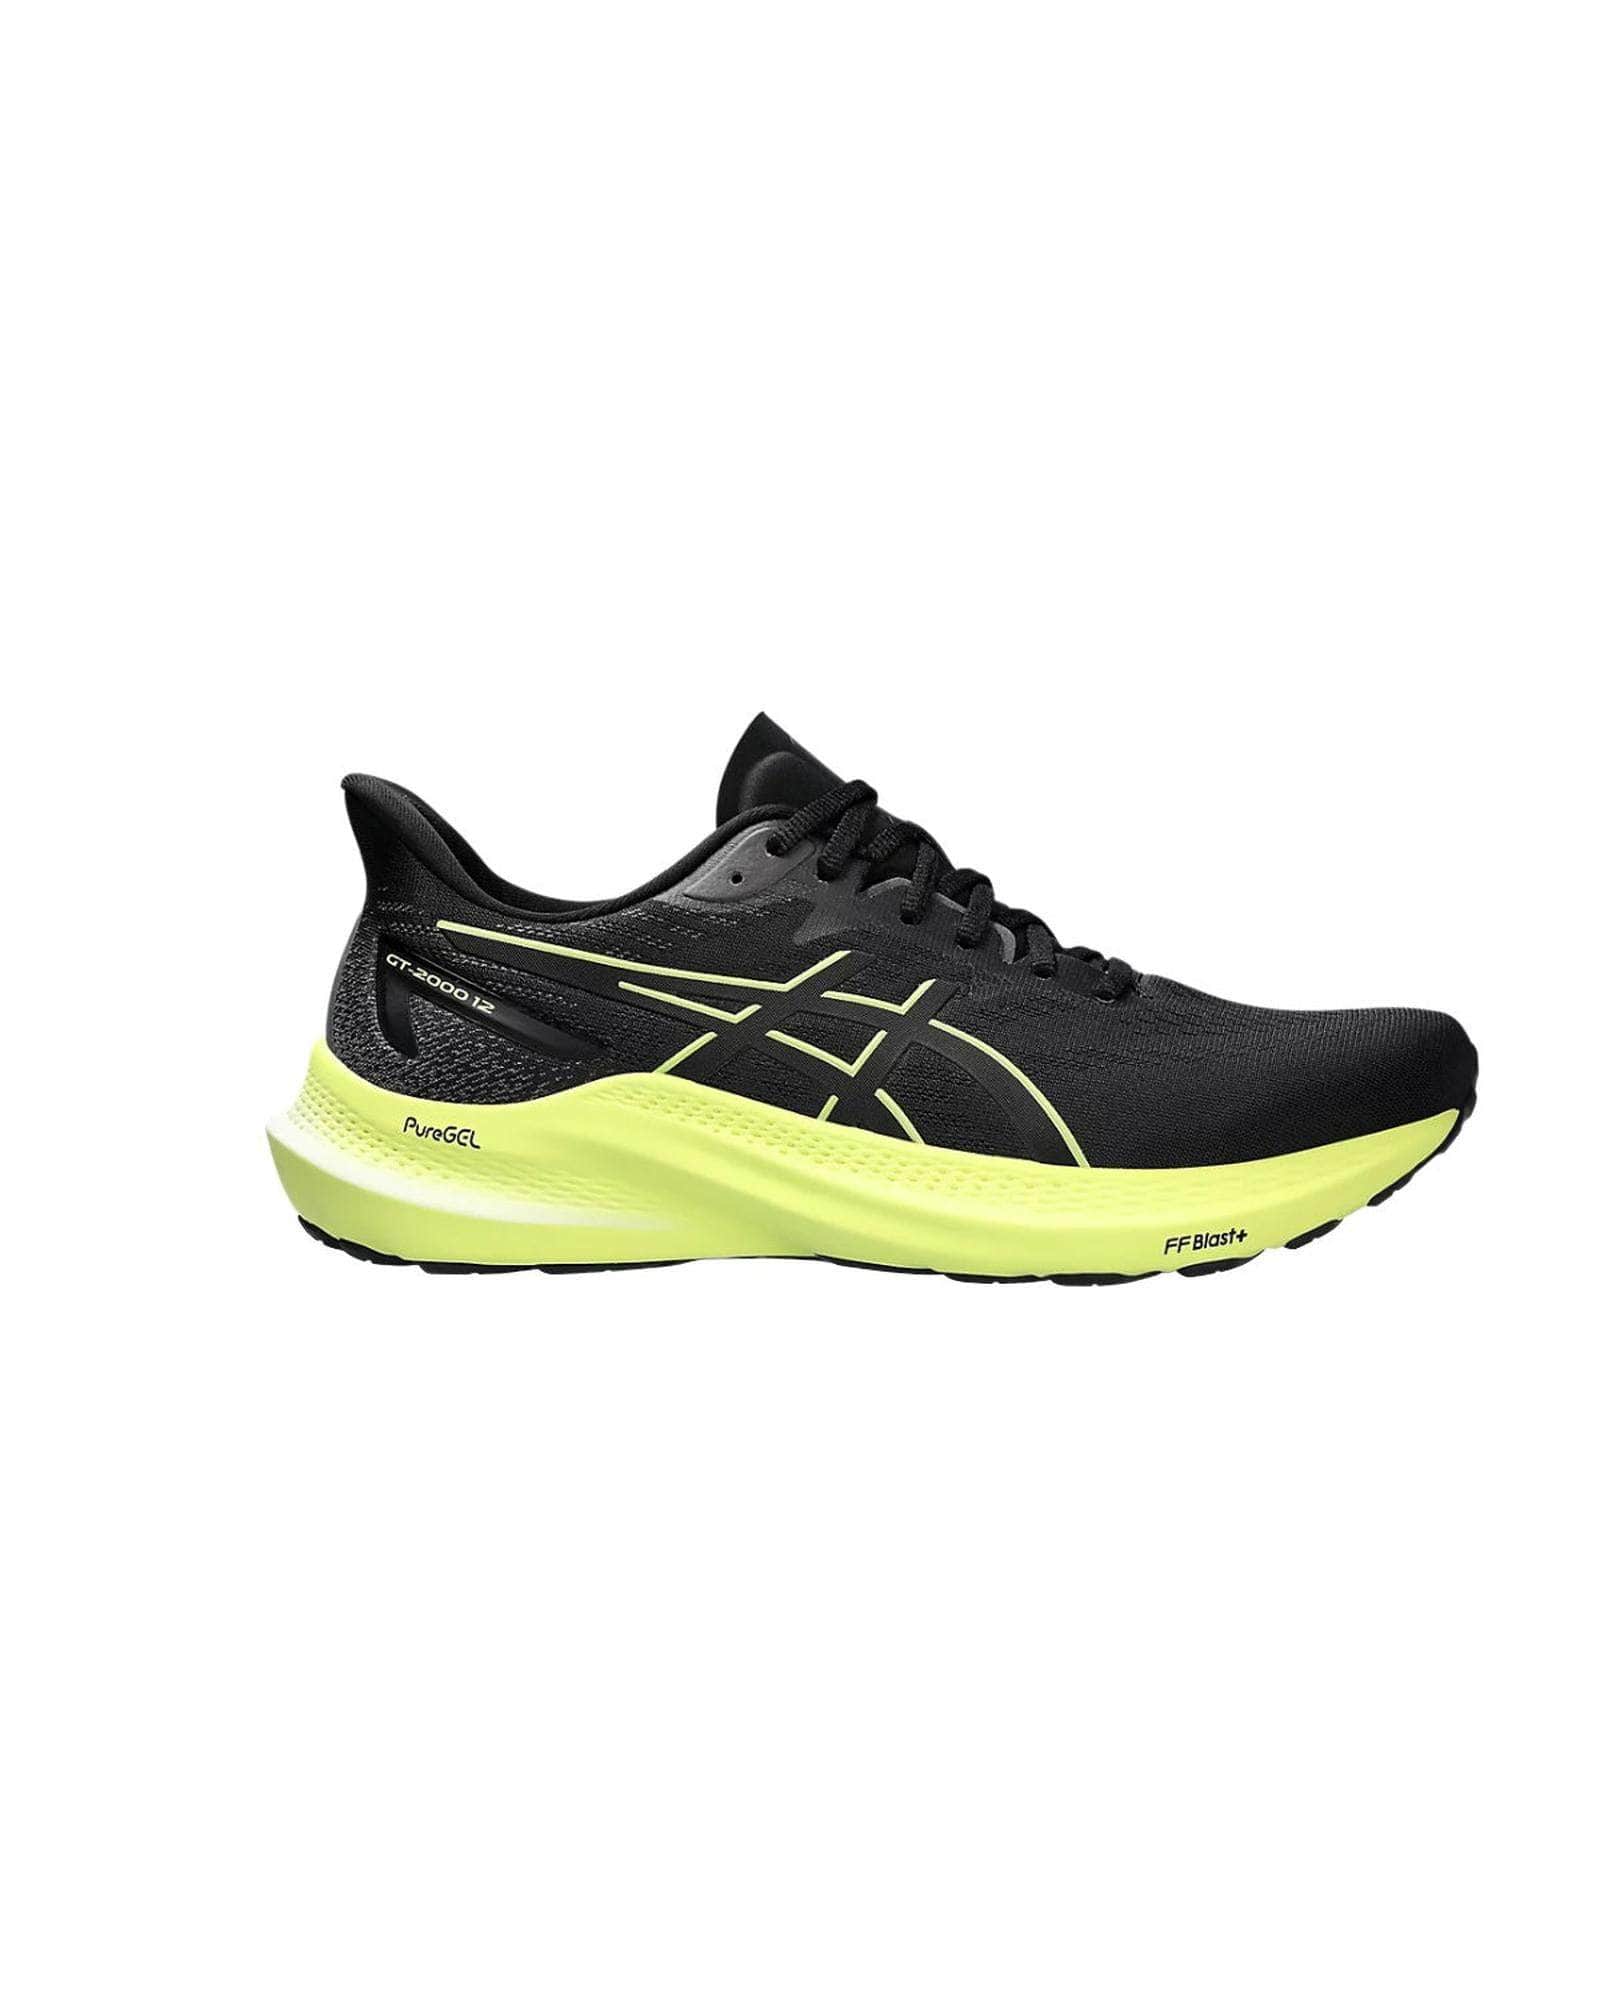 Asics Shadow Stride Lightweight Stability Running Shoes